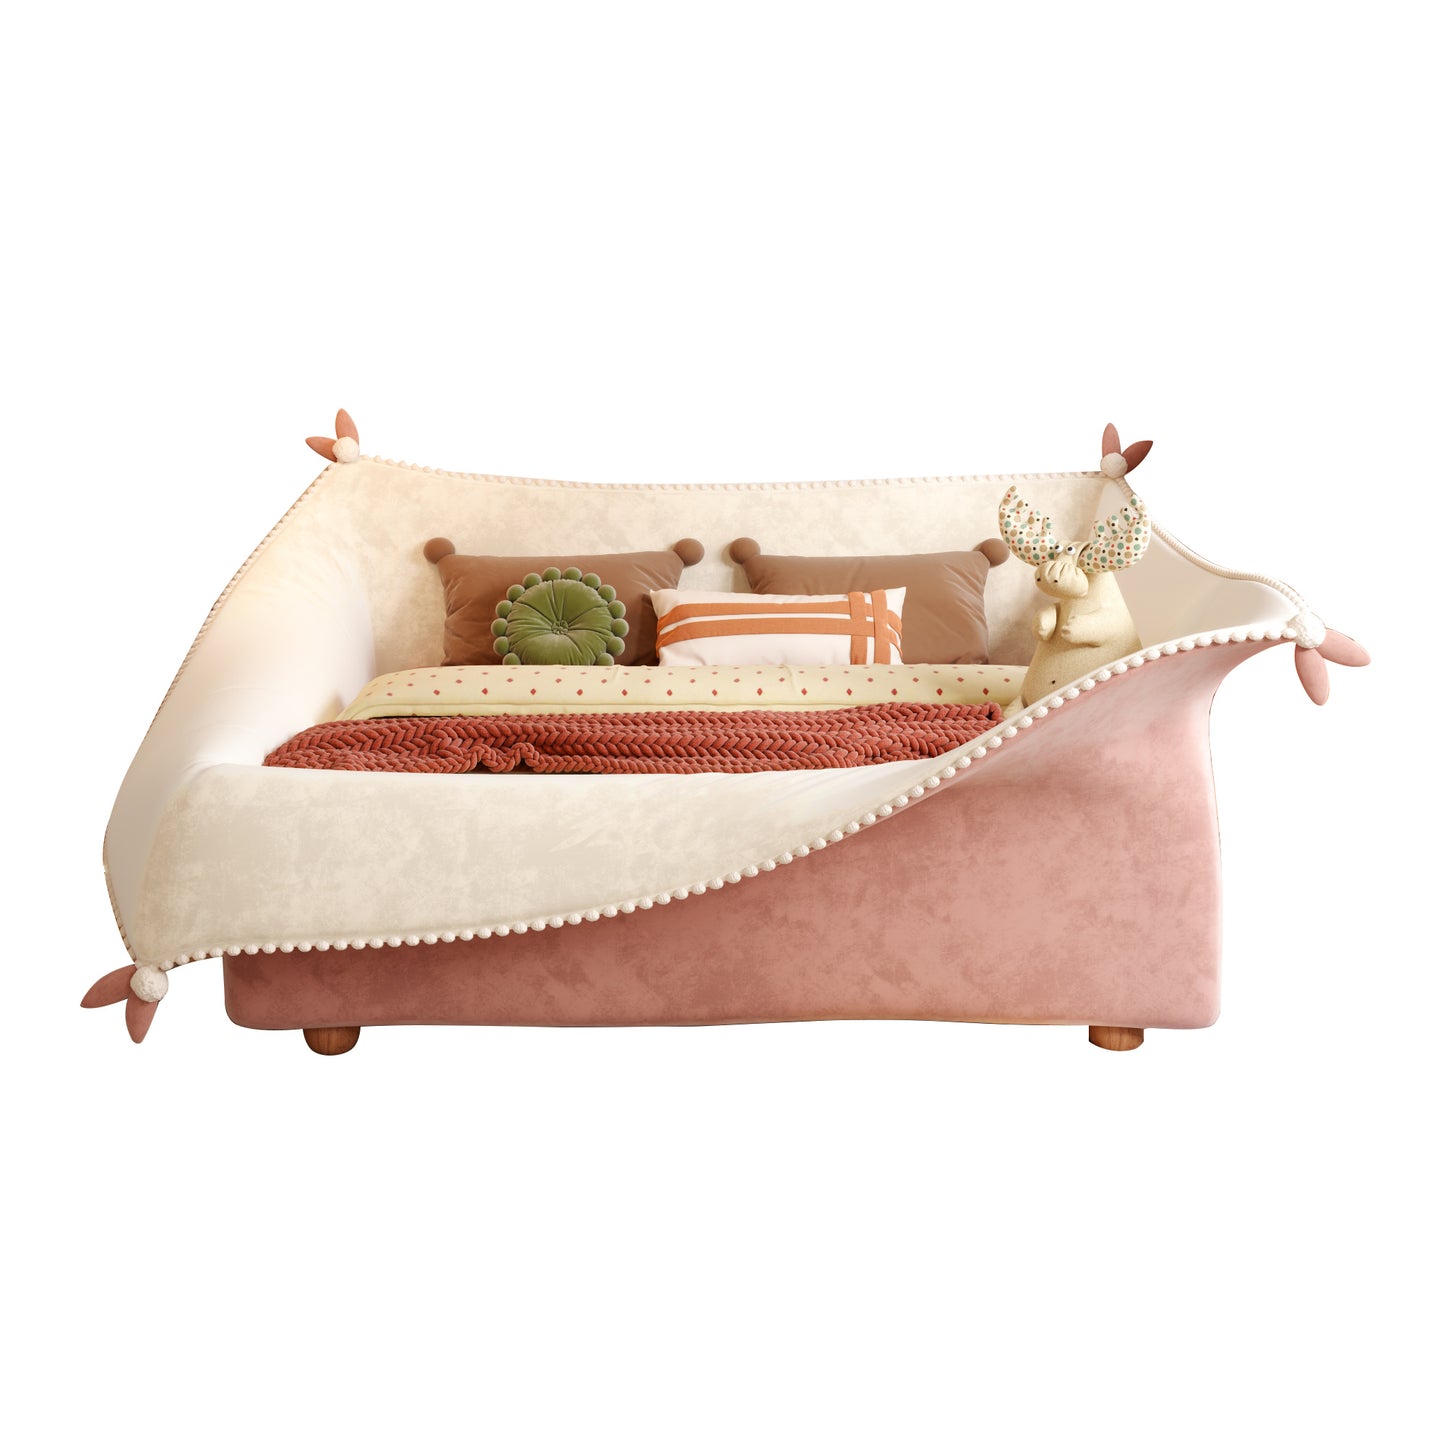 JASIWAY Magic Pocket Kids Bed with Guardrail